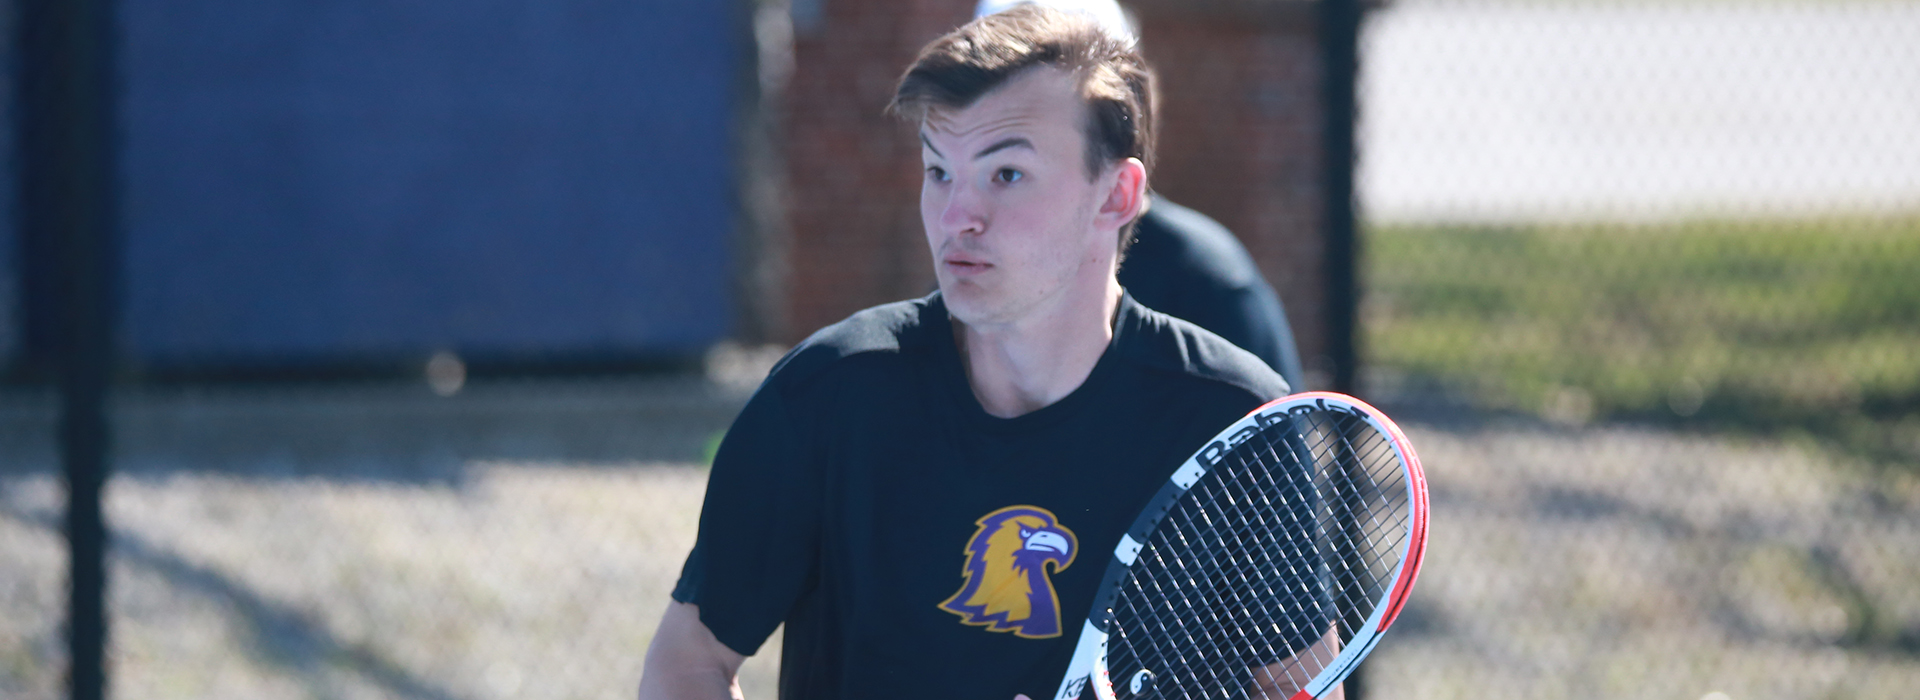 Evzen Holis named co-OVC Male Tennis Player of the Week